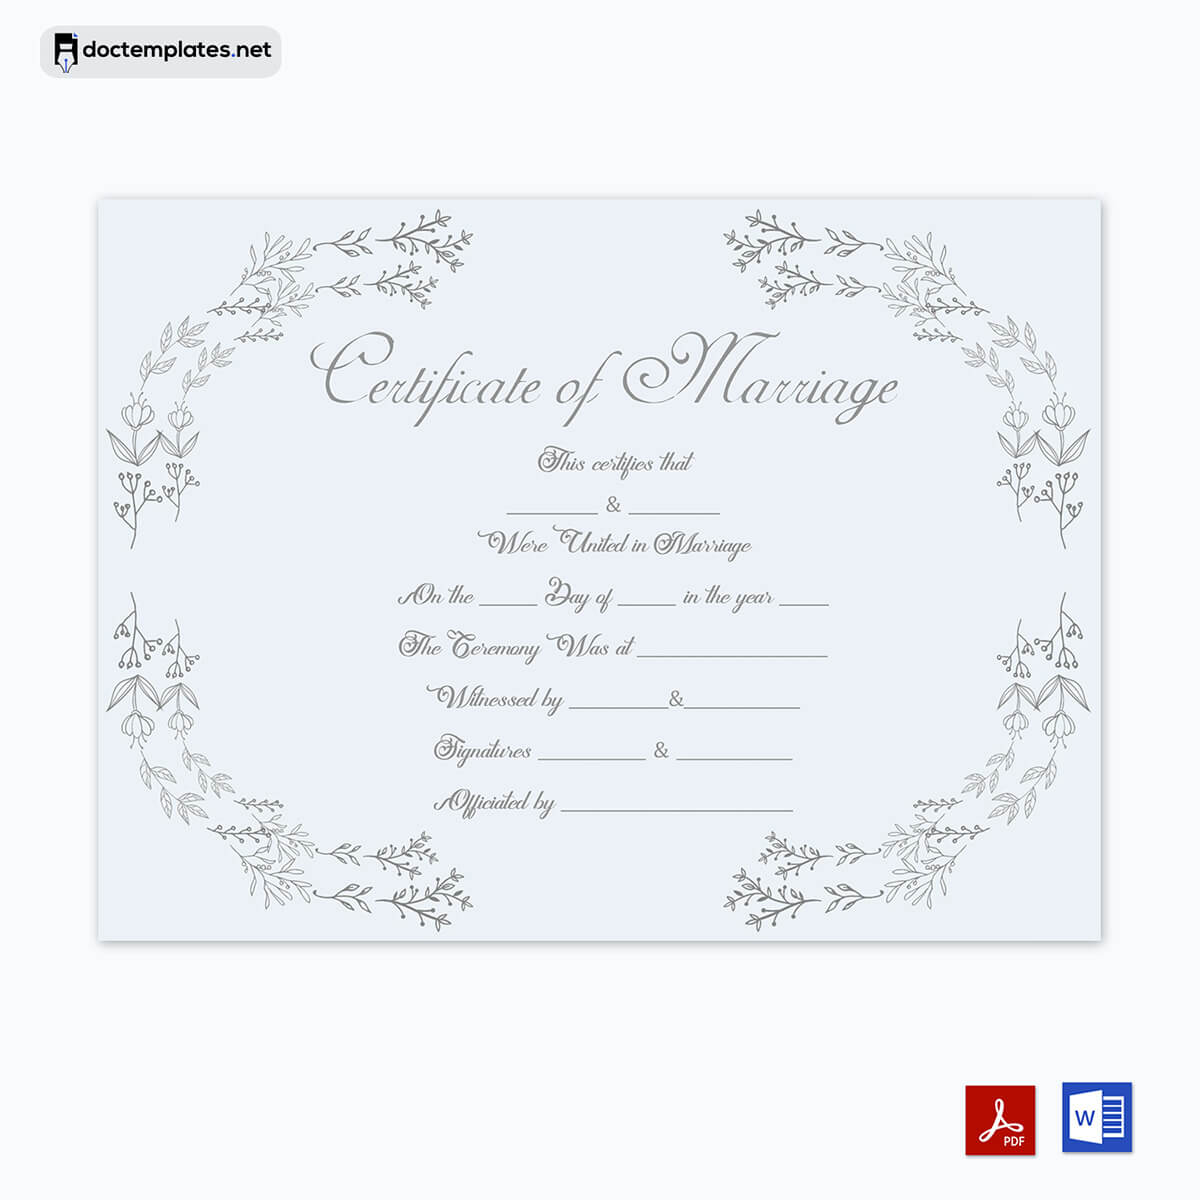  marriage certificate pdf download 01